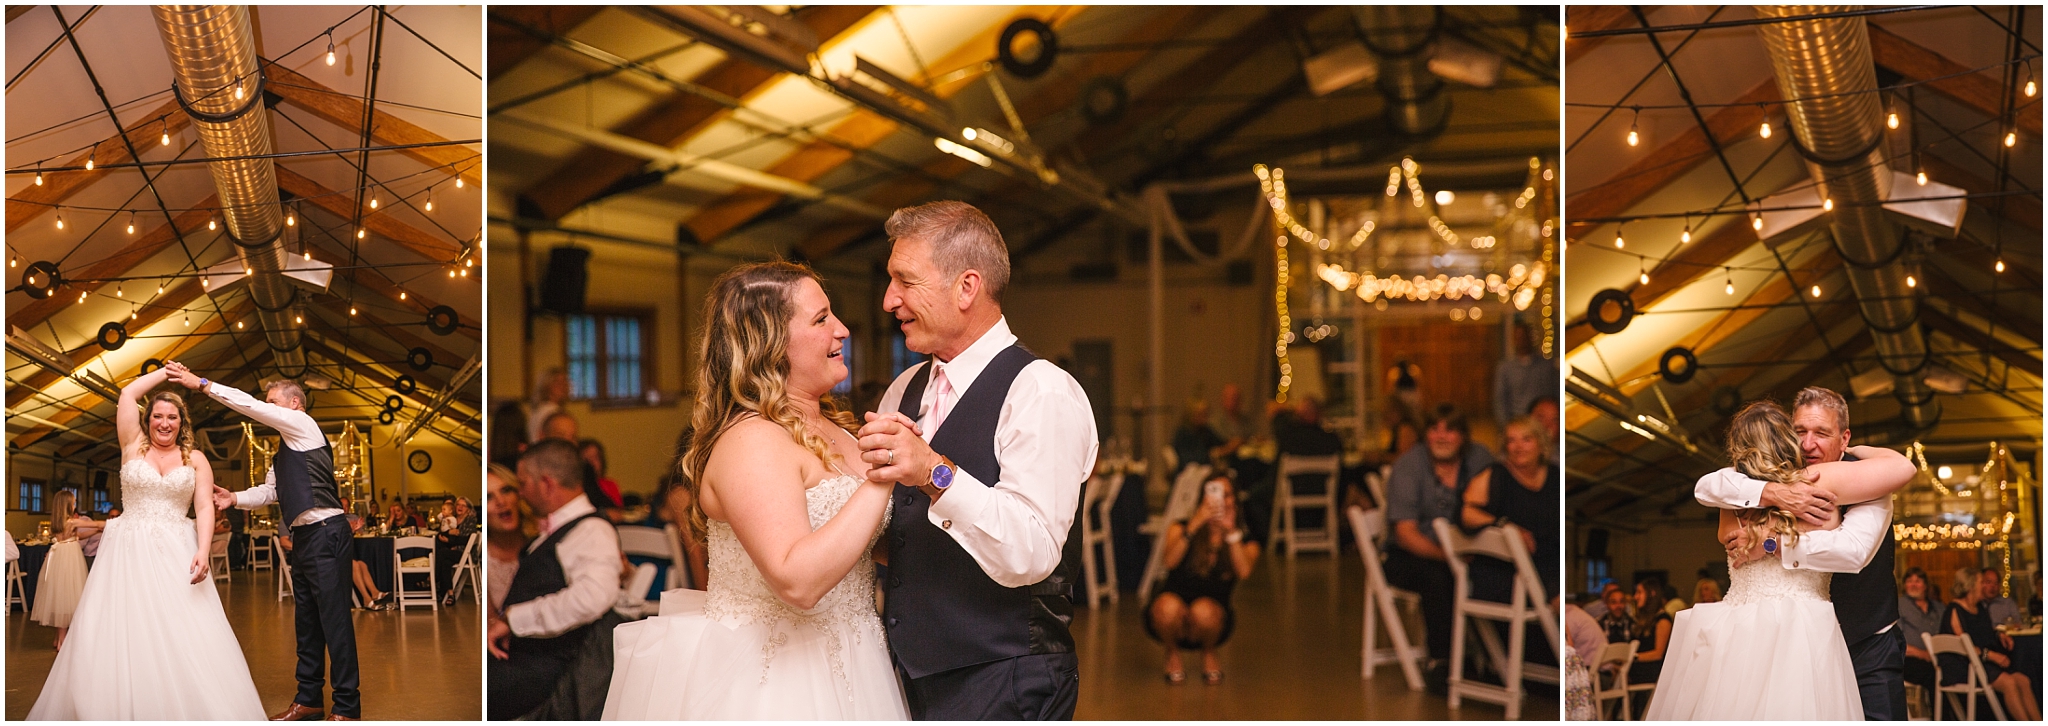 Bride dances with her father at Pickering Barn wedding reception in Issaquah Washington